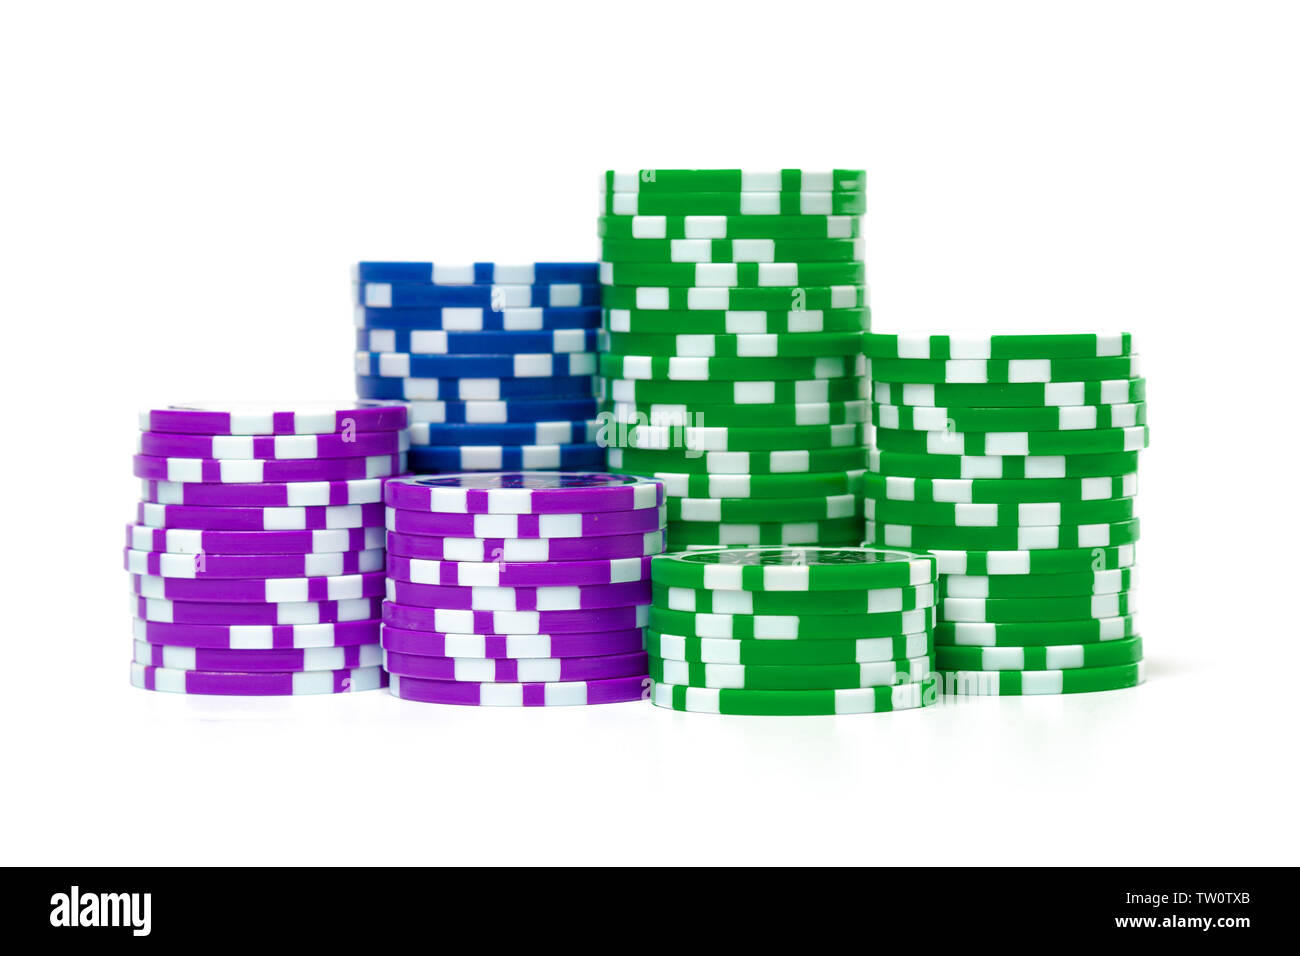 Stacks of poker chips isolated on white background Stock Photo